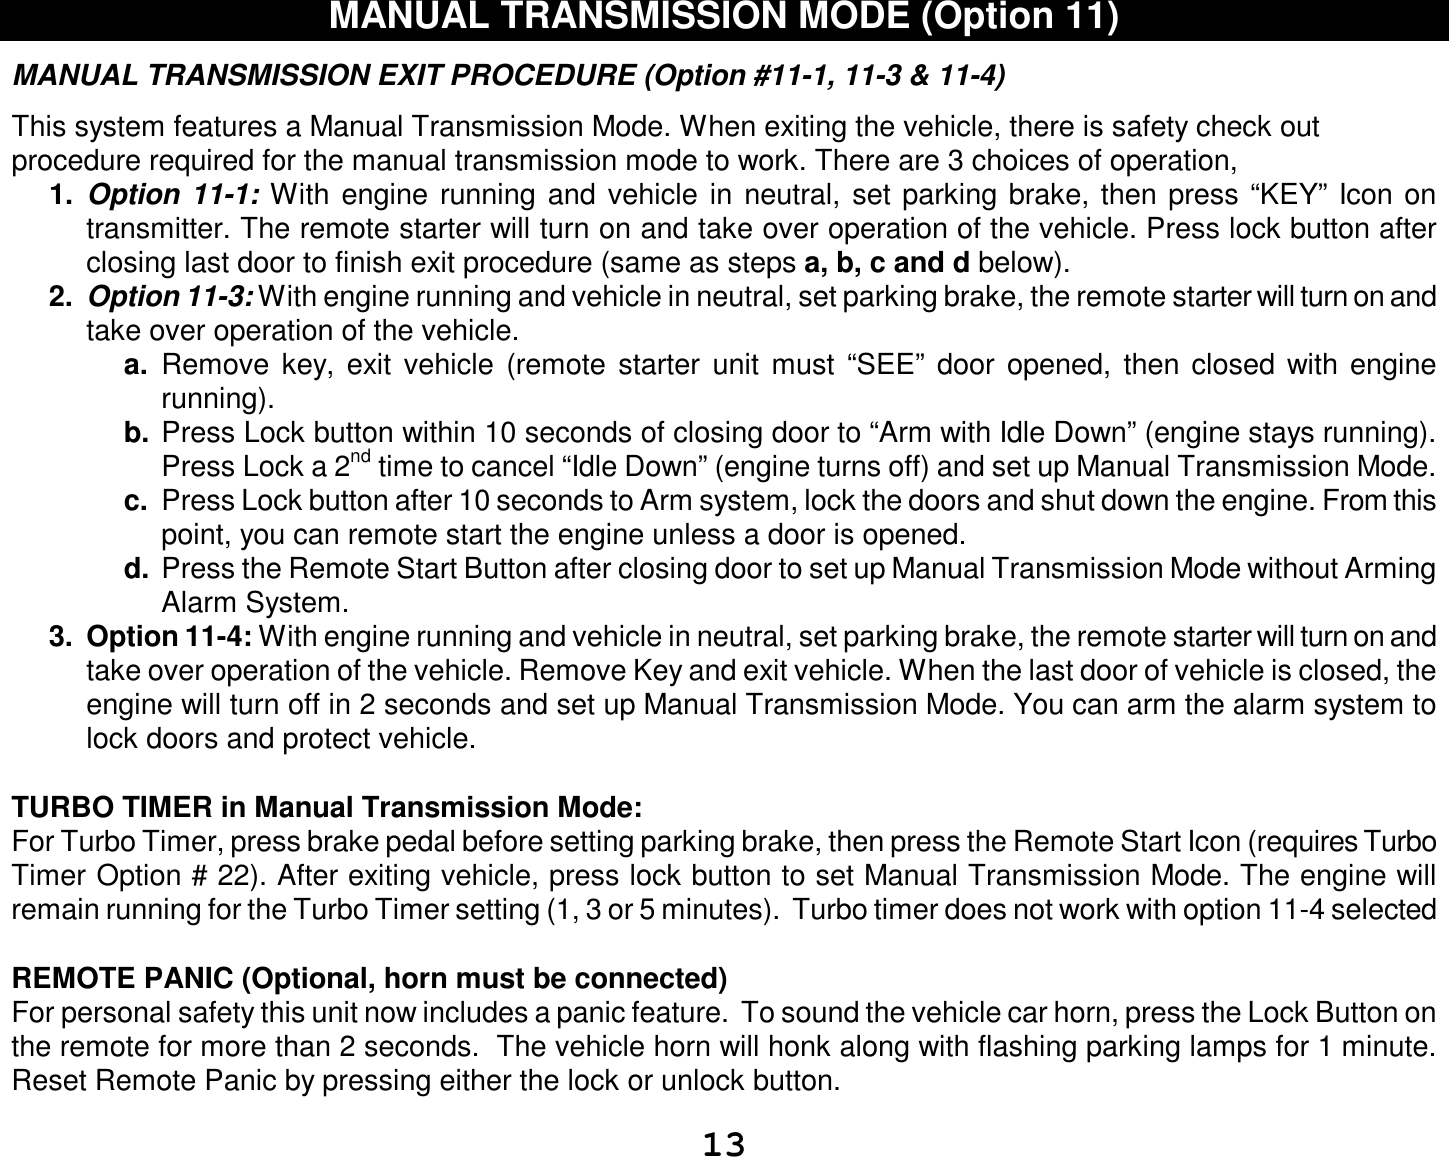  13 MANUAL TRANSMISSION MODE (Option 11)  MANUAL TRANSMISSION EXIT PROCEDURE (Option #11-1, 11-3 &amp; 11-4)  This system features a Manual Transmission Mode. When exiting the vehicle, there is safety check out procedure required for the manual transmission mode to work. There are 3 choices of operation,  1.  Option 11-1: With engine running and vehicle in neutral, set parking brake, then press “KEY” Icon on transmitter. The remote starter will turn on and take over operation of the vehicle. Press lock button after closing last door to finish exit procedure (same as steps a, b, c and d below). 2.  Option 11-3: With engine running and vehicle in neutral, set parking brake, the remote starter will turn on and take over operation of the vehicle. a.  Remove key, exit vehicle (remote starter unit must “SEE” door opened, then closed with engine running). b. Press Lock button within 10 seconds of closing door to “Arm with Idle Down” (engine stays running). Press Lock a 2nd time to cancel “Idle Down” (engine turns off) and set up Manual Transmission Mode. c.  Press Lock button after 10 seconds to Arm system, lock the doors and shut down the engine. From this point, you can remote start the engine unless a door is opened. d. Press the Remote Start Button after closing door to set up Manual Transmission Mode without Arming Alarm System.  3. Option 11-4: With engine running and vehicle in neutral, set parking brake, the remote starter will turn on and take over operation of the vehicle. Remove Key and exit vehicle. When the last door of vehicle is closed, the engine will turn off in 2 seconds and set up Manual Transmission Mode. You can arm the alarm system to lock doors and protect vehicle.   TURBO TIMER in Manual Transmission Mode: For Turbo Timer, press brake pedal before setting parking brake, then press the Remote Start Icon (requires Turbo Timer Option # 22). After exiting vehicle, press lock button to set Manual Transmission Mode. The engine will remain running for the Turbo Timer setting (1, 3 or 5 minutes).  Turbo timer does not work with option 11-4 selected  REMOTE PANIC (Optional, horn must be connected)  For personal safety this unit now includes a panic feature.  To sound the vehicle car horn, press the Lock Button on the remote for more than 2 seconds.  The vehicle horn will honk along with flashing parking lamps for 1 minute. Reset Remote Panic by pressing either the lock or unlock button.   